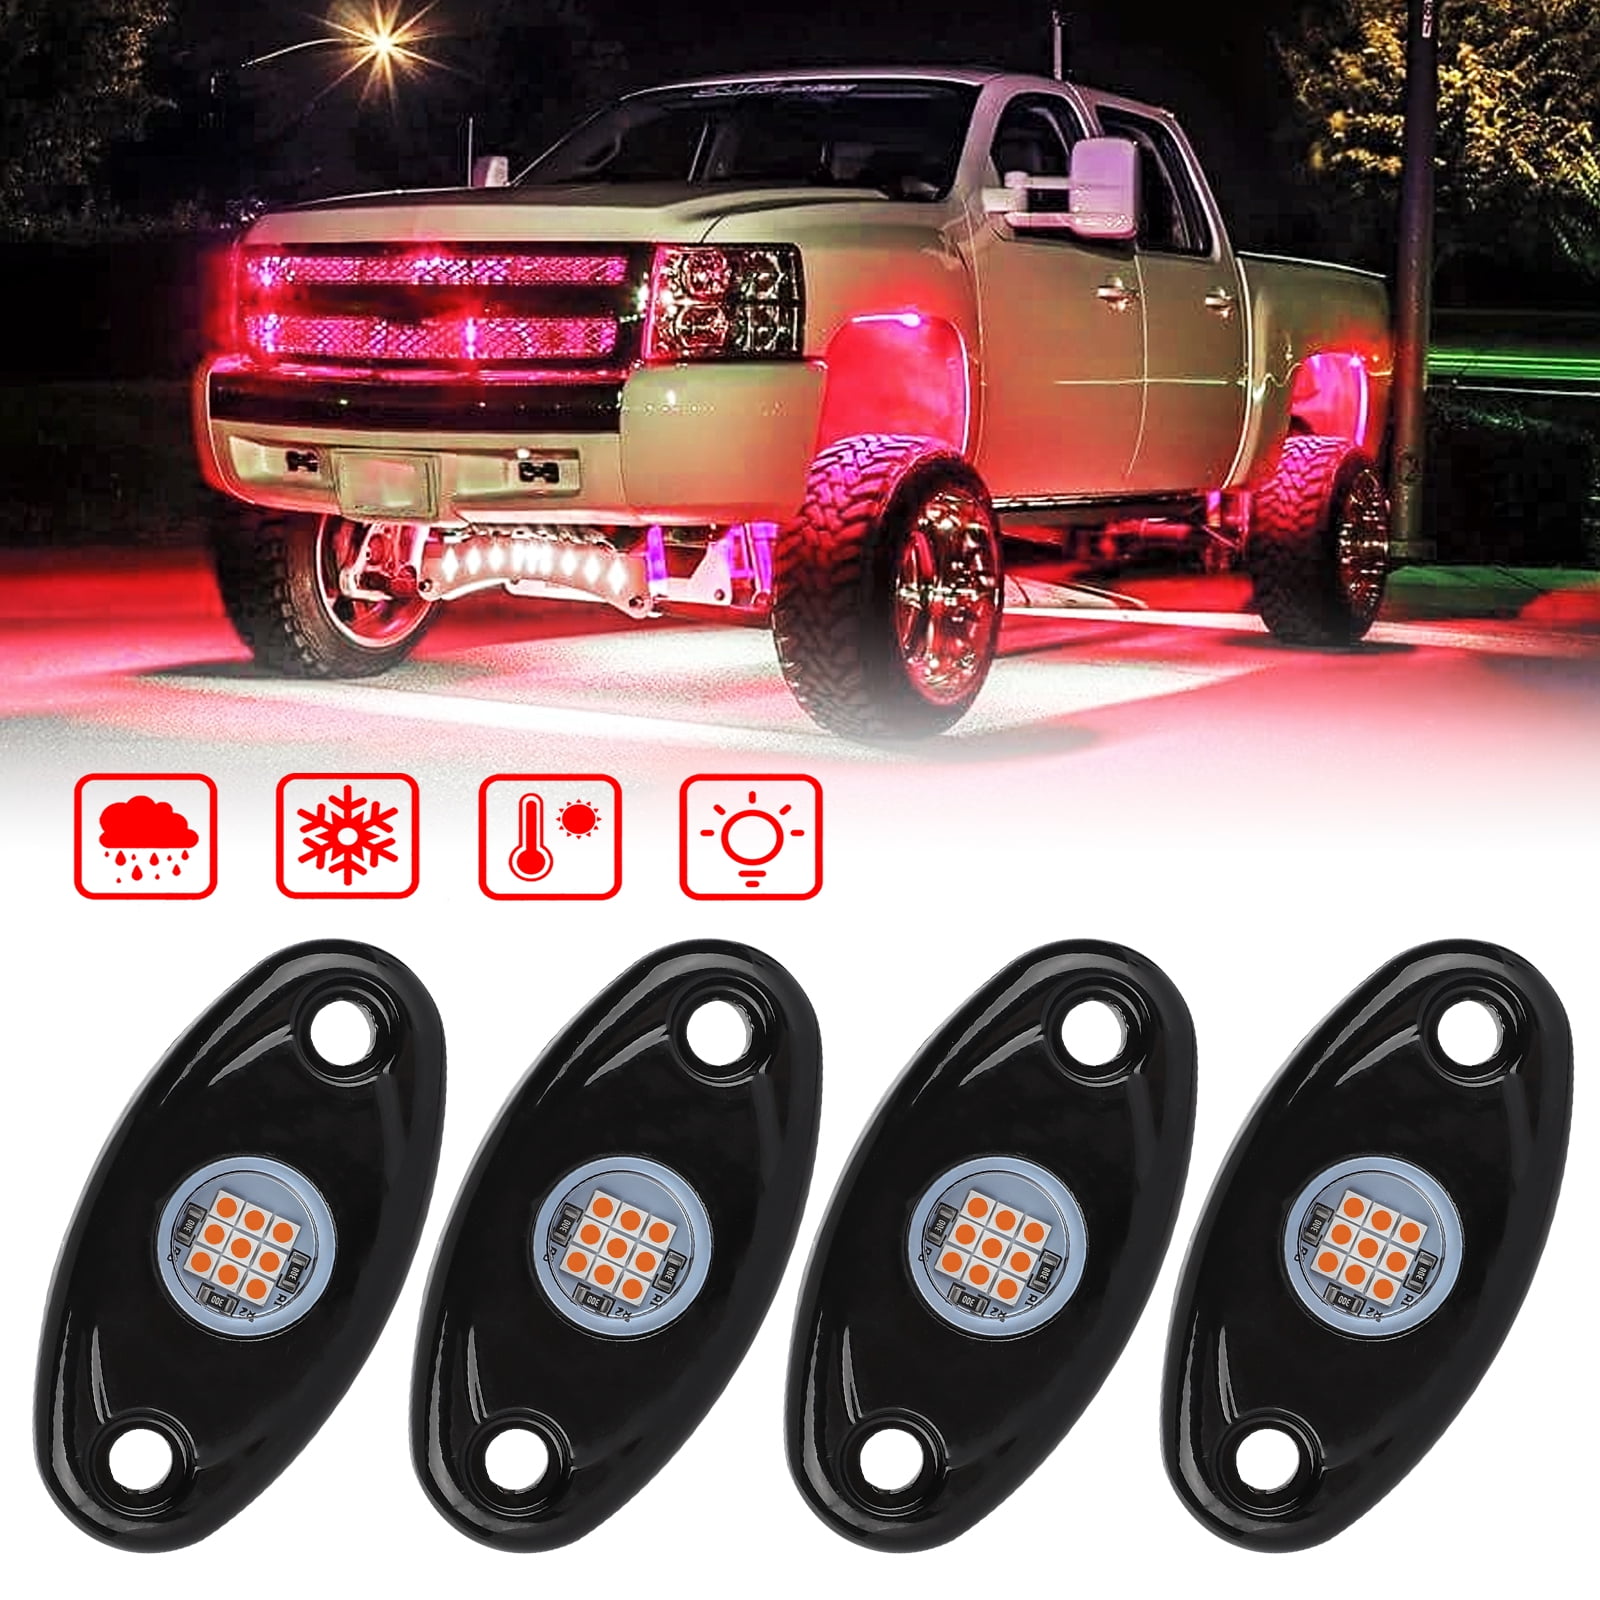 Wireless Bluetooth Controller Mode of DIY Flash and Timer for Exterior Cars Truck ATV SUV Jeep Boat Yacht Motorcycle 4 Pods AMONLY RGB Neon Led Rock Lights Music 6pcs Led Chips